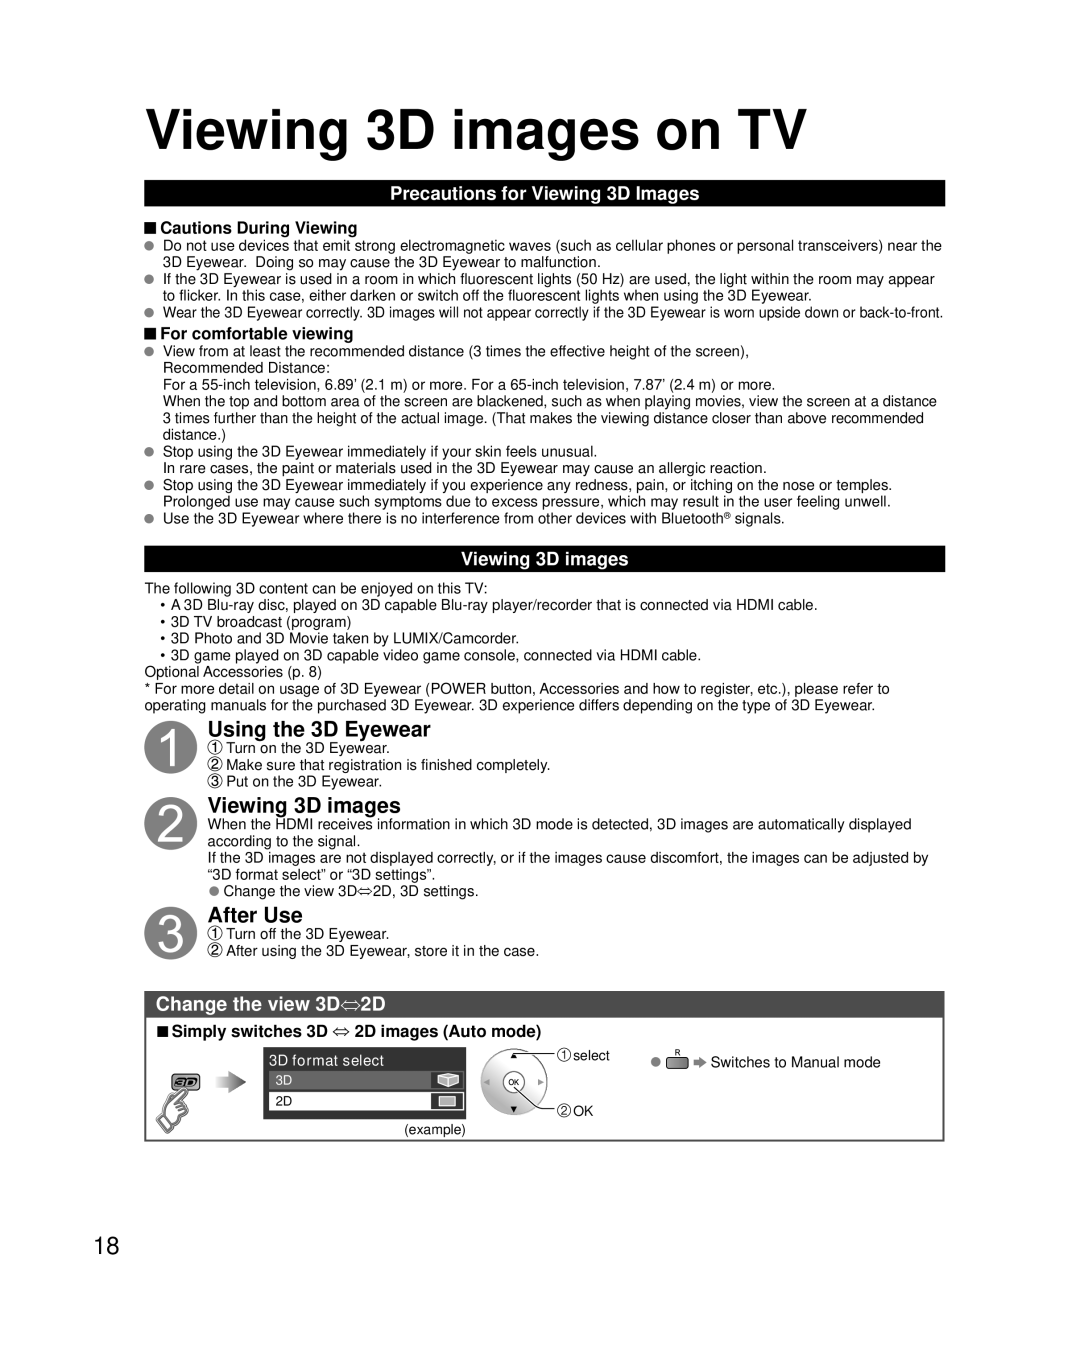 Panasonic TC-P55VT50 Viewing 3D images on TV, Using the 3D Eyewear, After Use, Change the view 3D⇔2D, 3D format select 